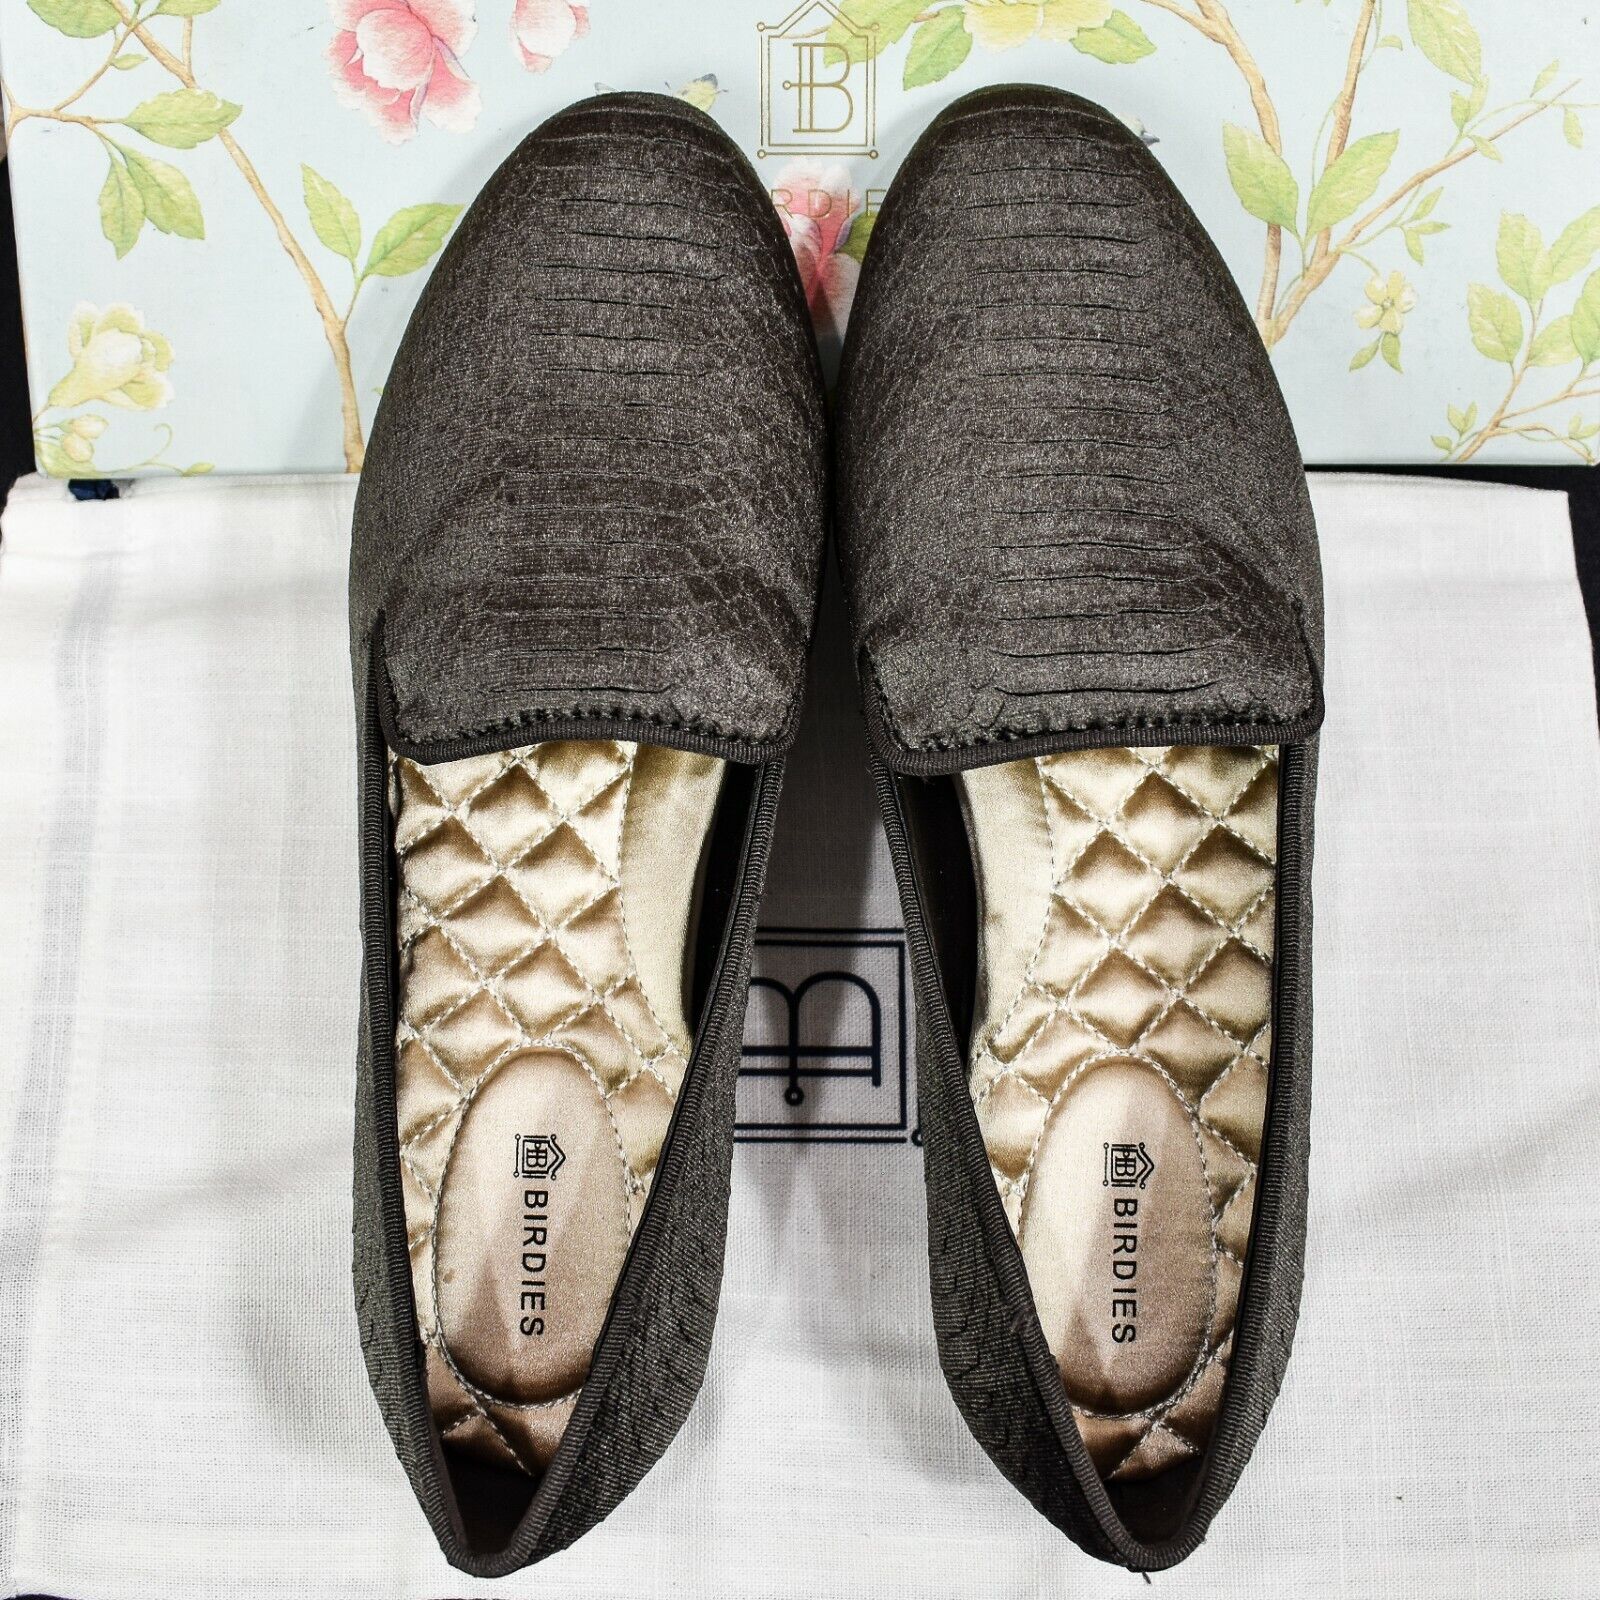 BIRDIES The Starling Loafer Slip on Python Siz Shoes in Sale SALE% OFF Charcoal Max 76% OFF